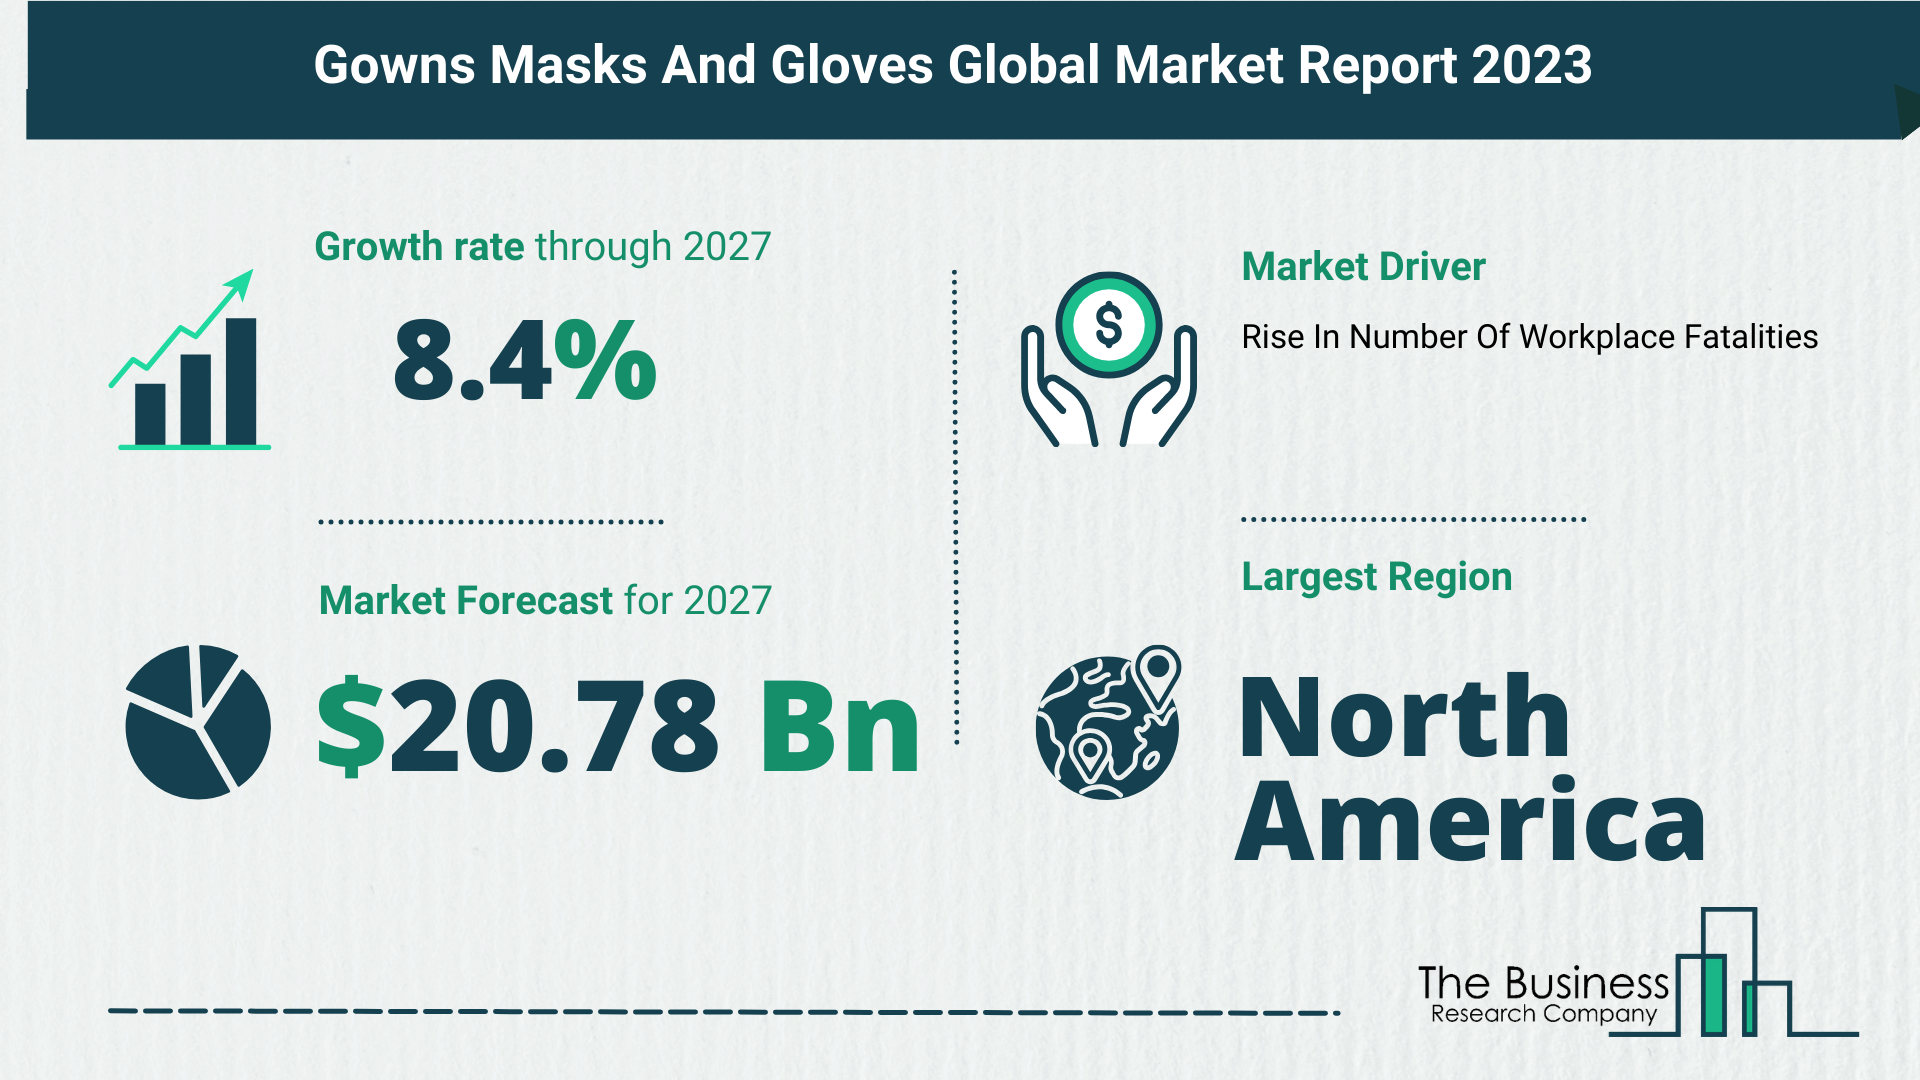 Global Gowns Masks And Gloves Market